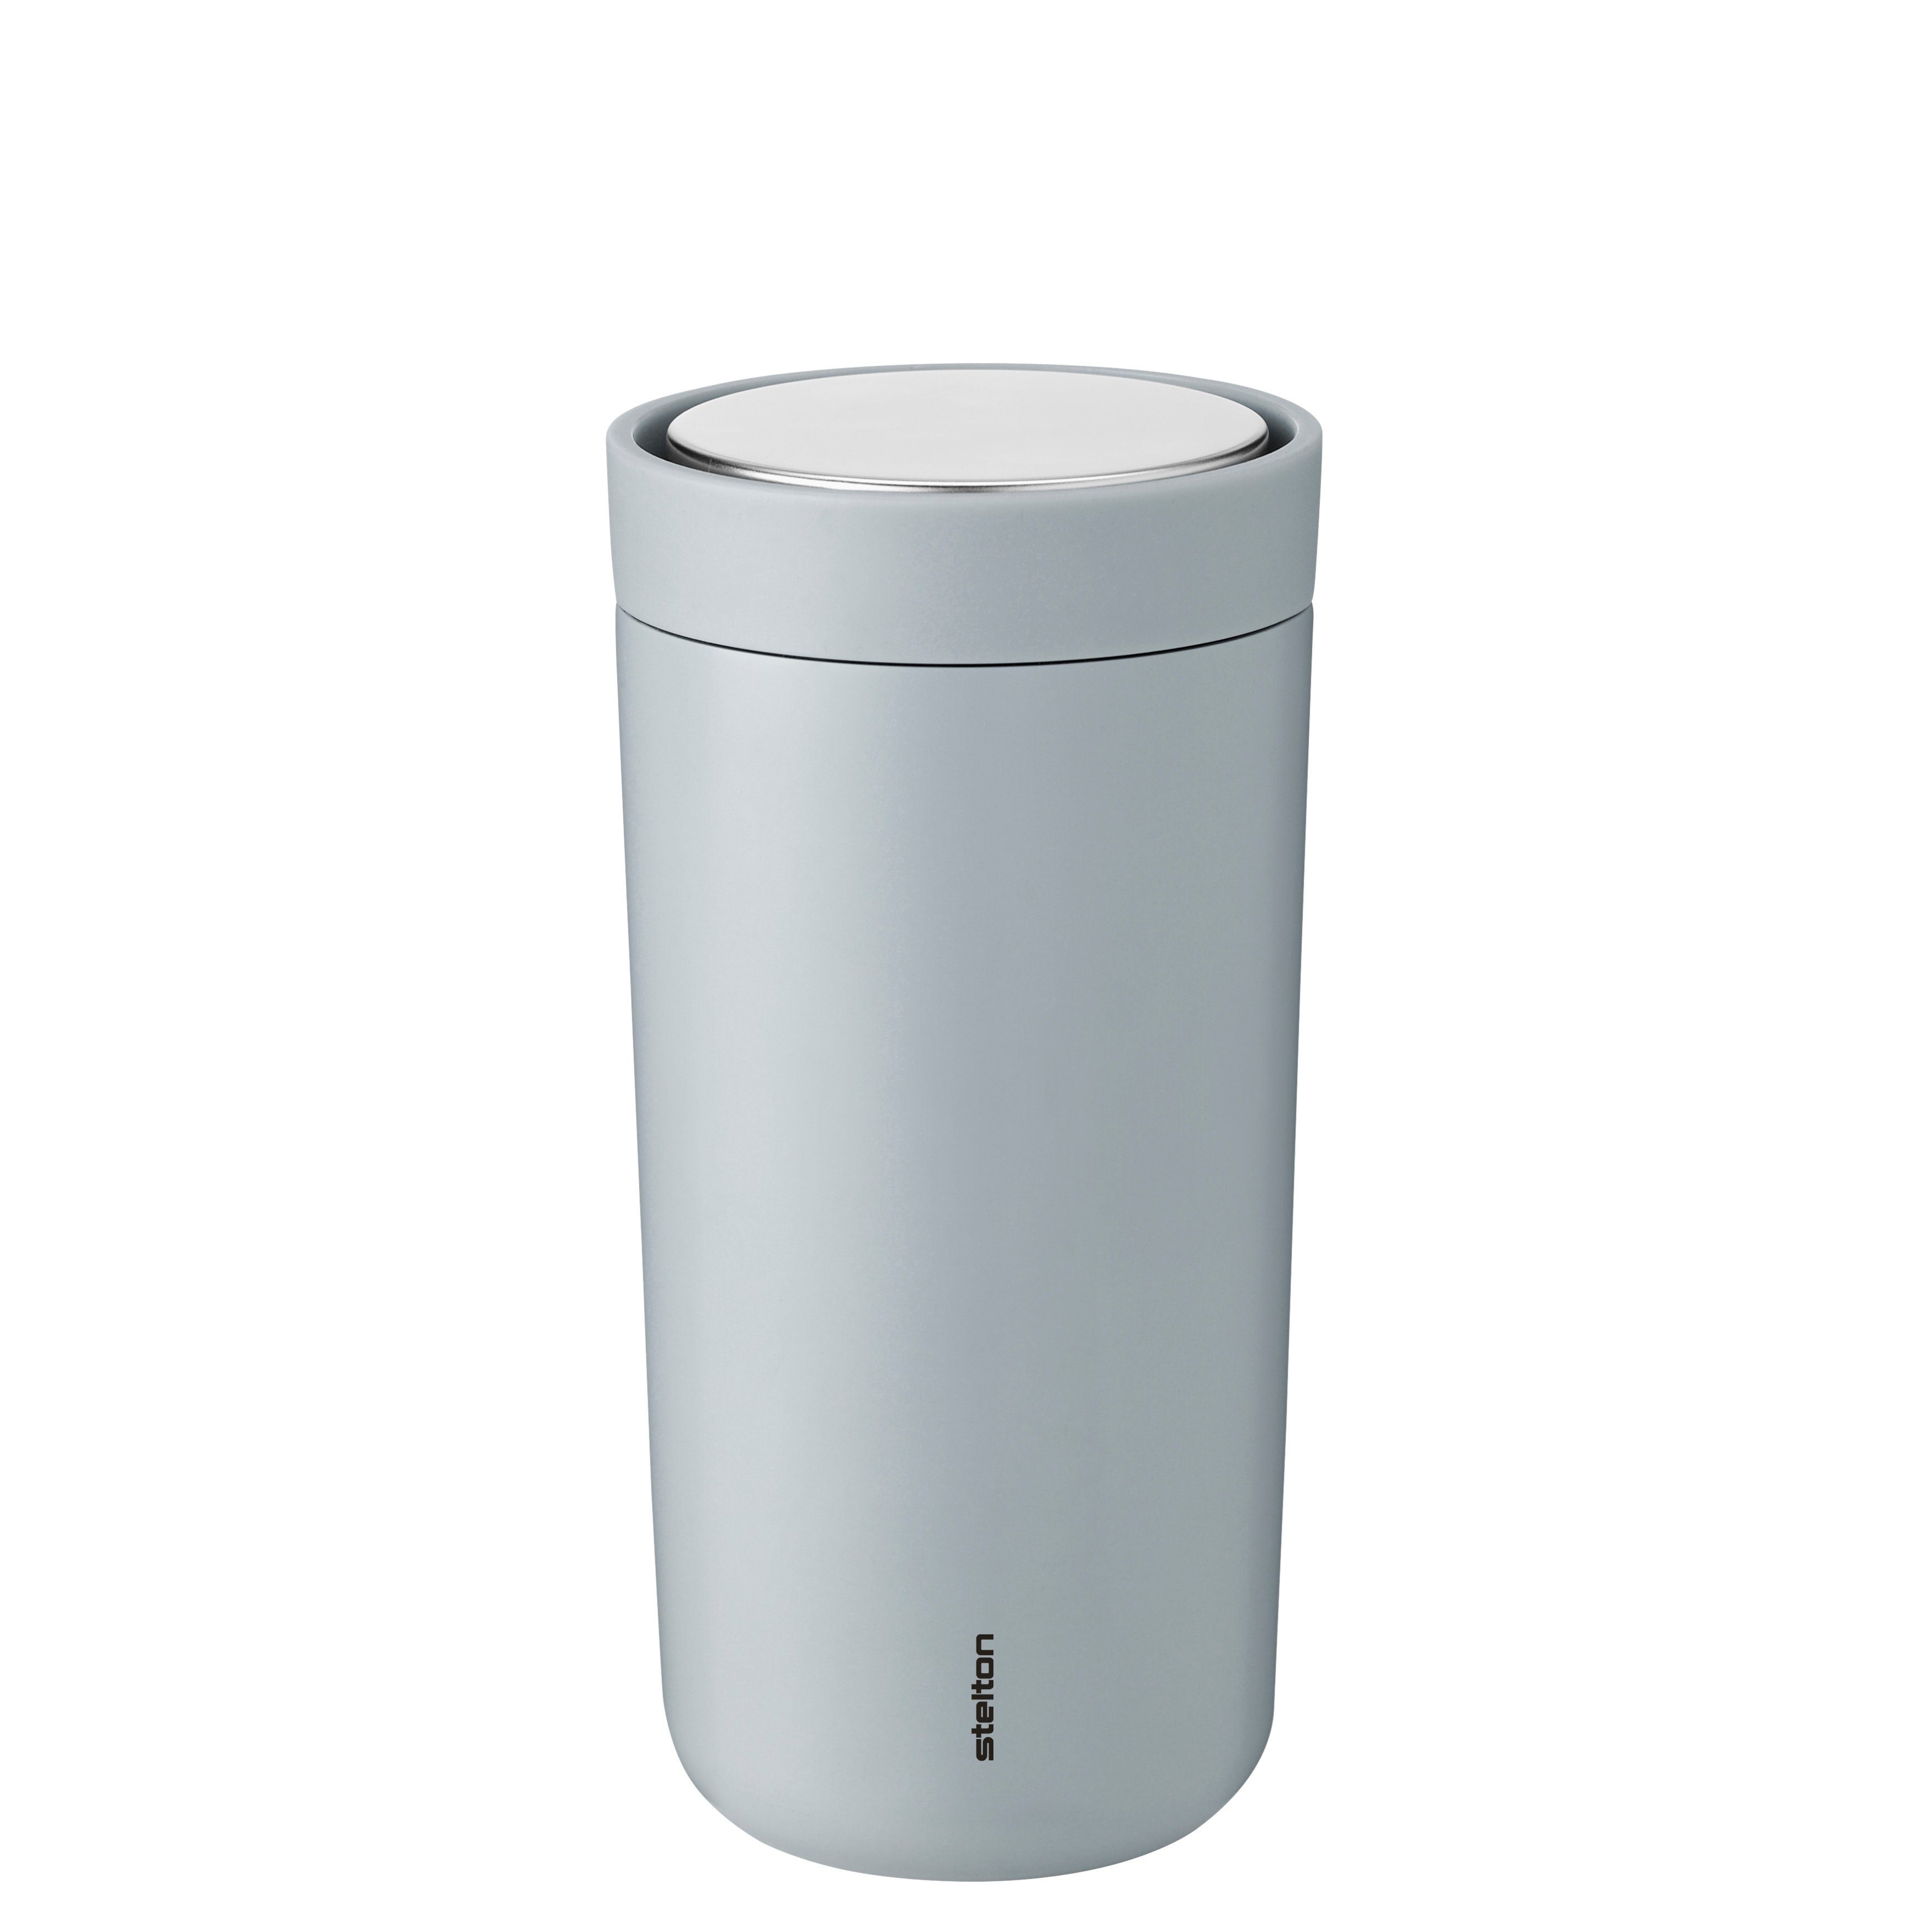 Stelton Thermobecher Stelton To Go Click Thermobecher, Edelstahl Soft cloud